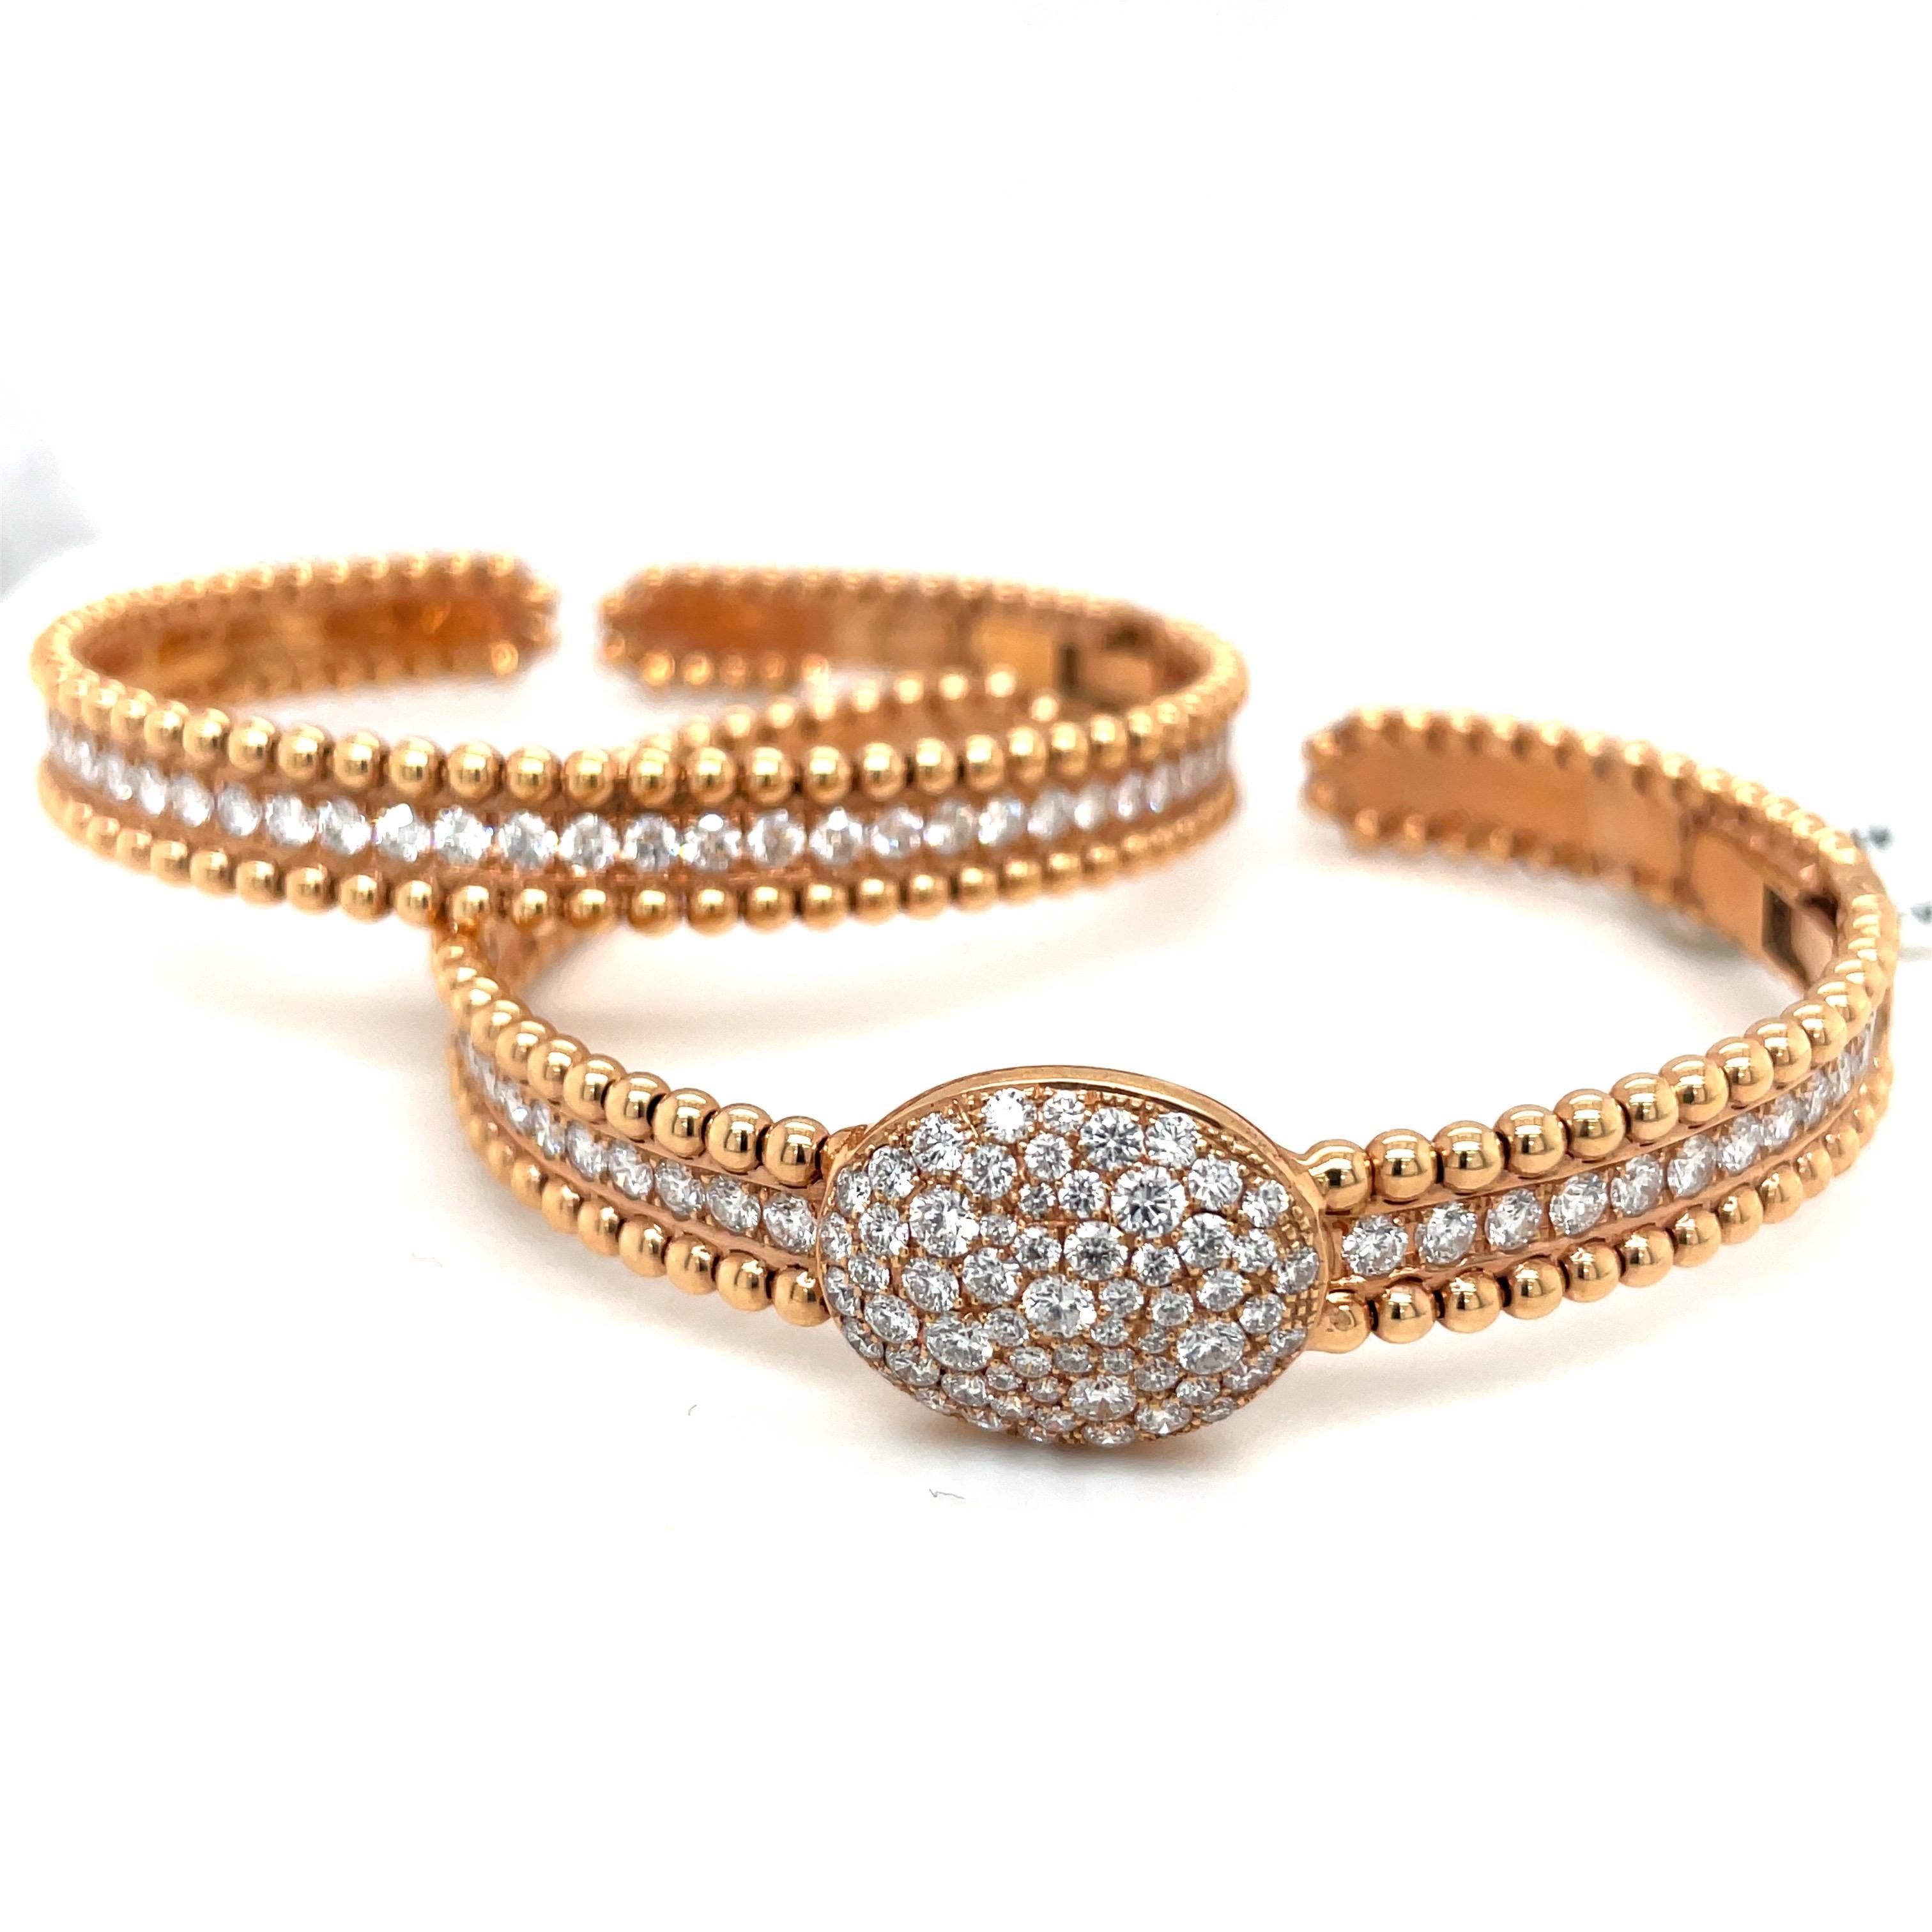 18KT Rose Gold 1.85Ct Diamond Bracelet with Beaded Edge In New Condition For Sale In New York, NY